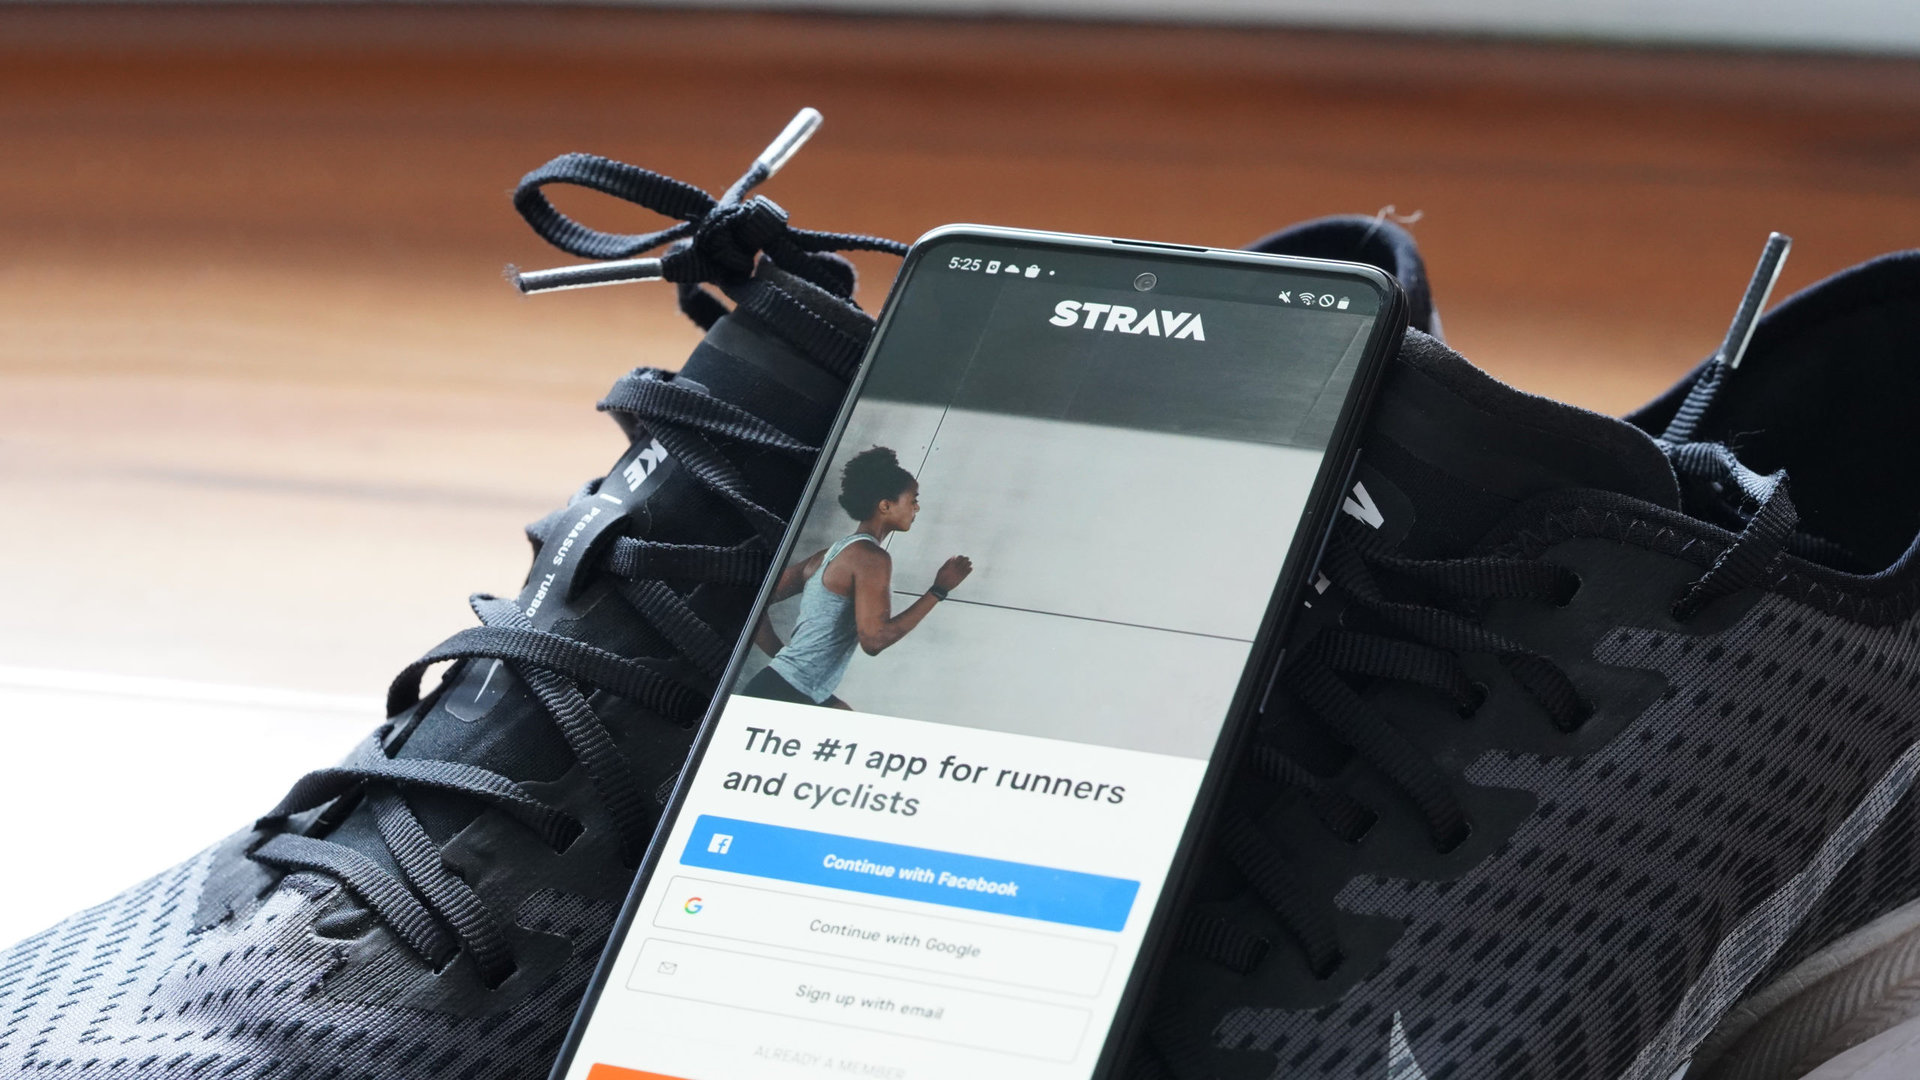 A Galaxy A51 resting on a running sneakers displays the Strava signup screen.